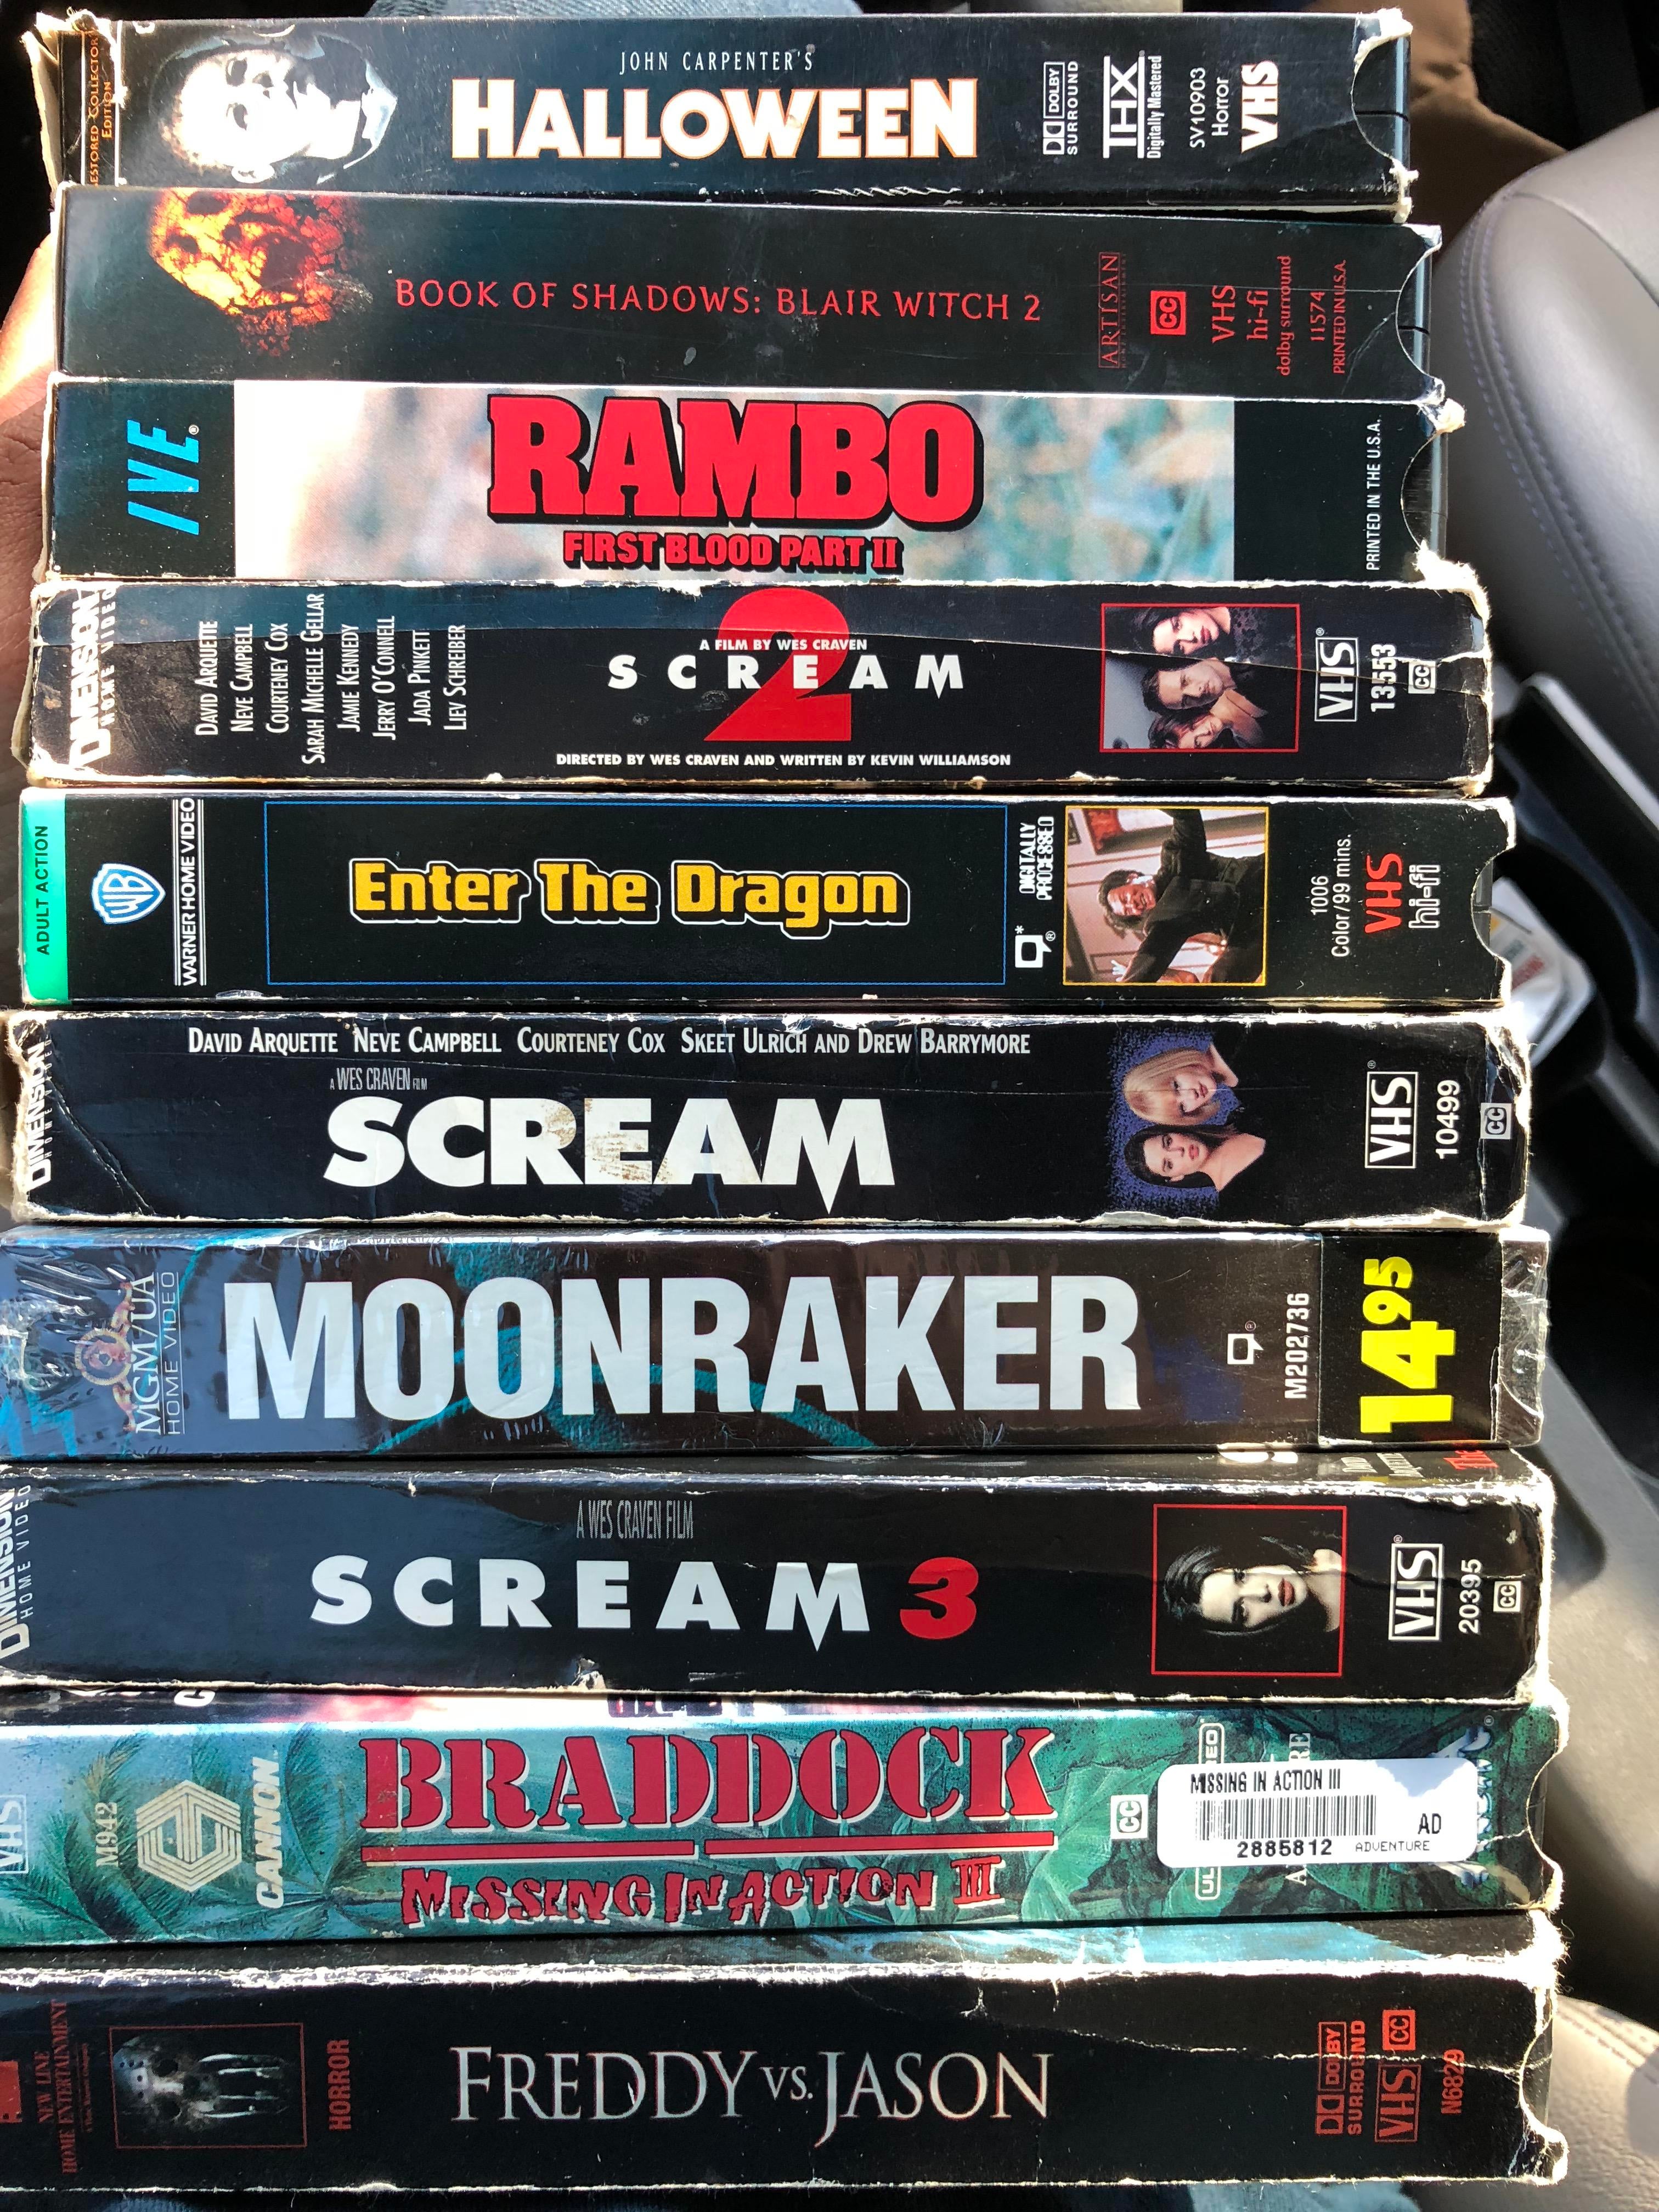 So I Ve Always Had Pretty Crap Luck With Vhs Hunting But Today